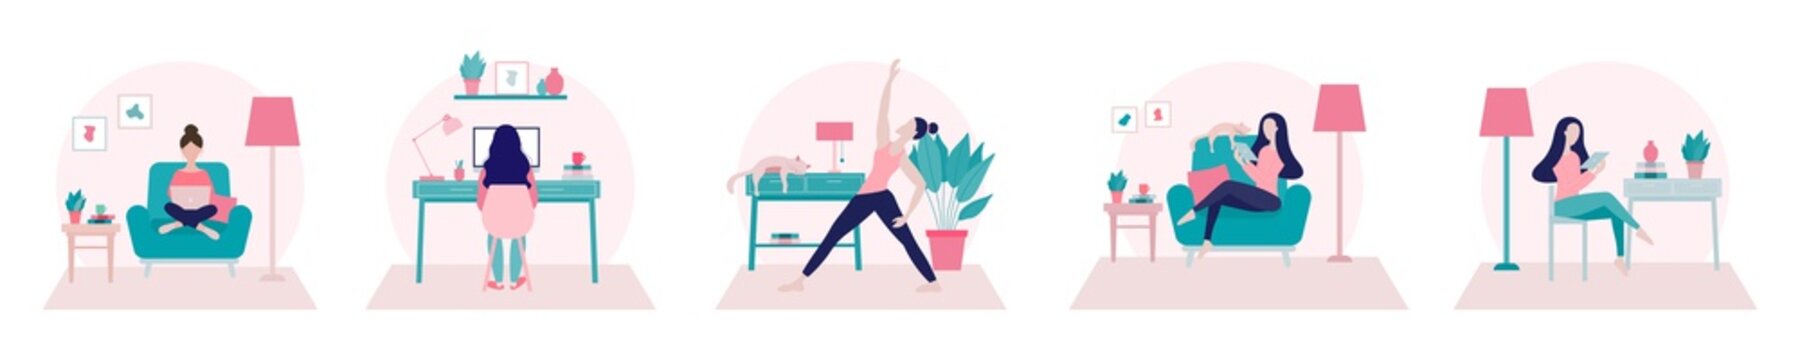 Stay home concept.Girl doing yoga,working from at home office and surfing on internet using tablet.Self isolation, quarantine due to Coronavirus. Set of flat vector illustration of home activities.